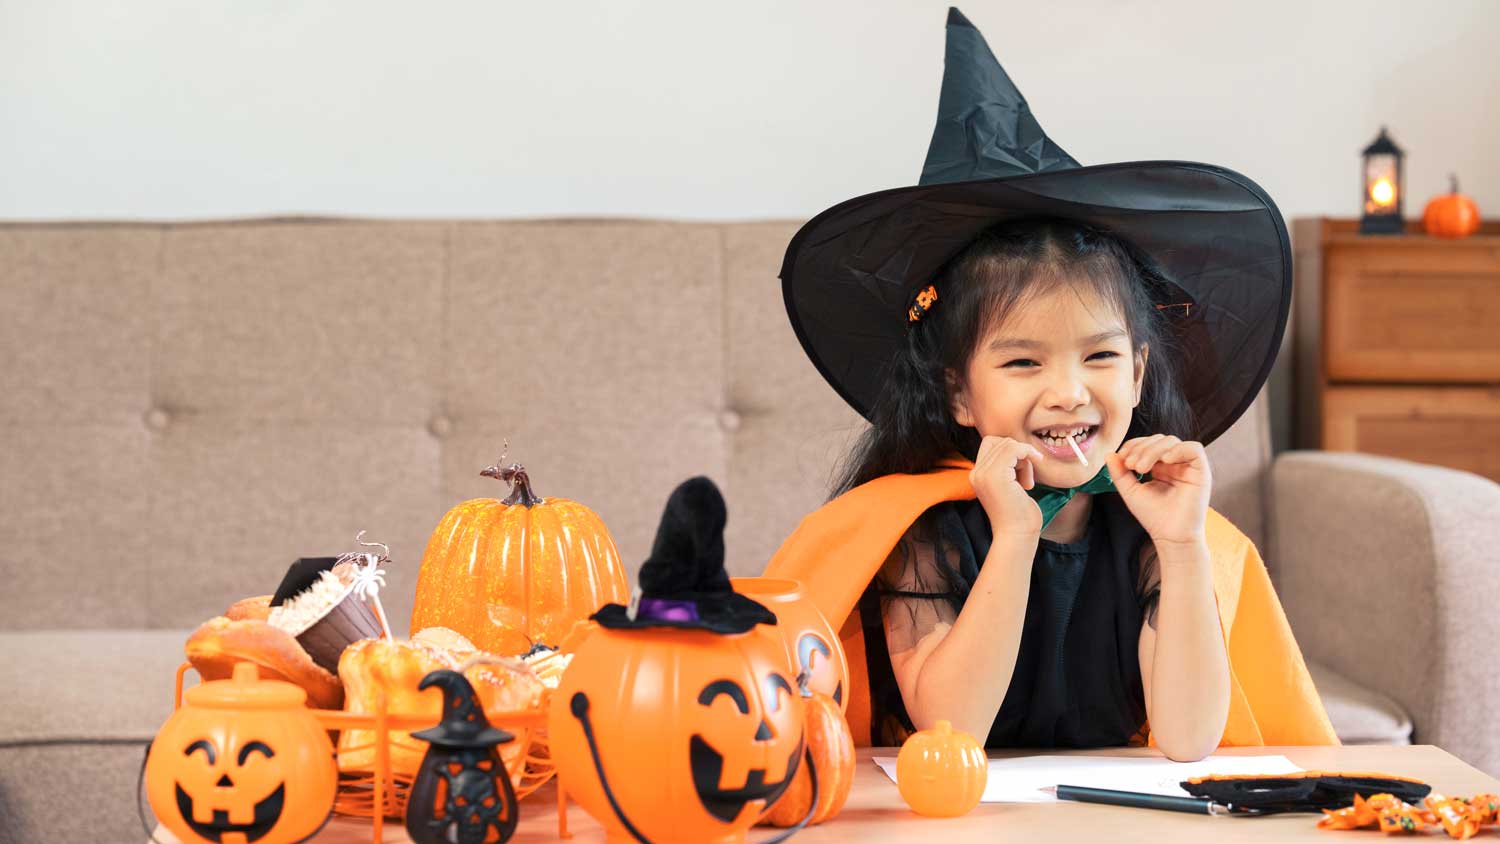 Girl in witch costume eating Halloween candy.